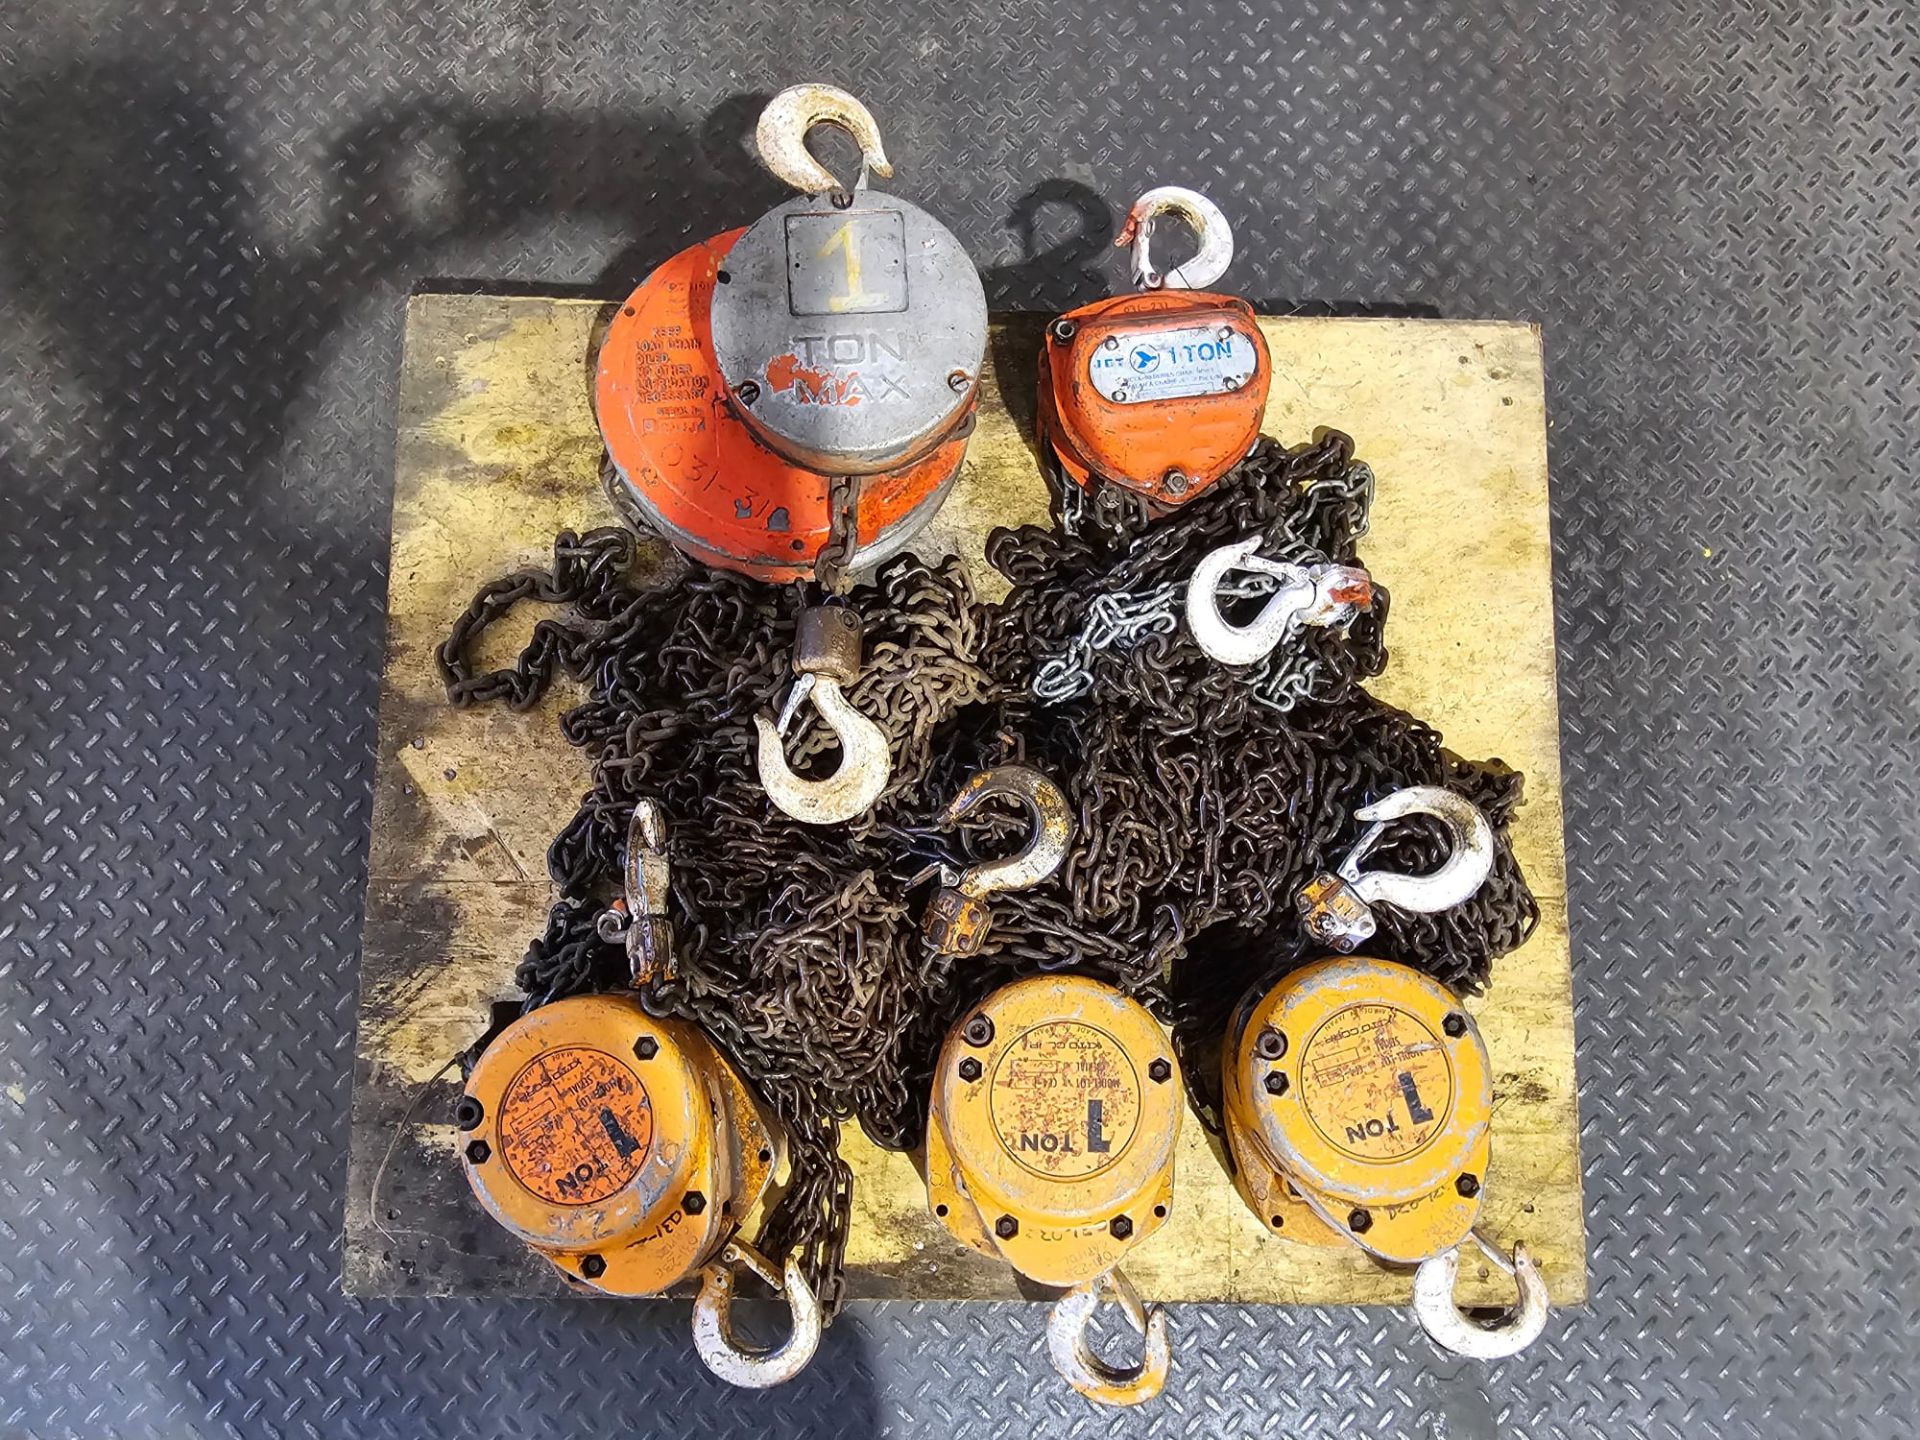 Lot of 3x 1T Kito and 1x 1T CM and 1x 1T Jet chain hoist - Image 5 of 7